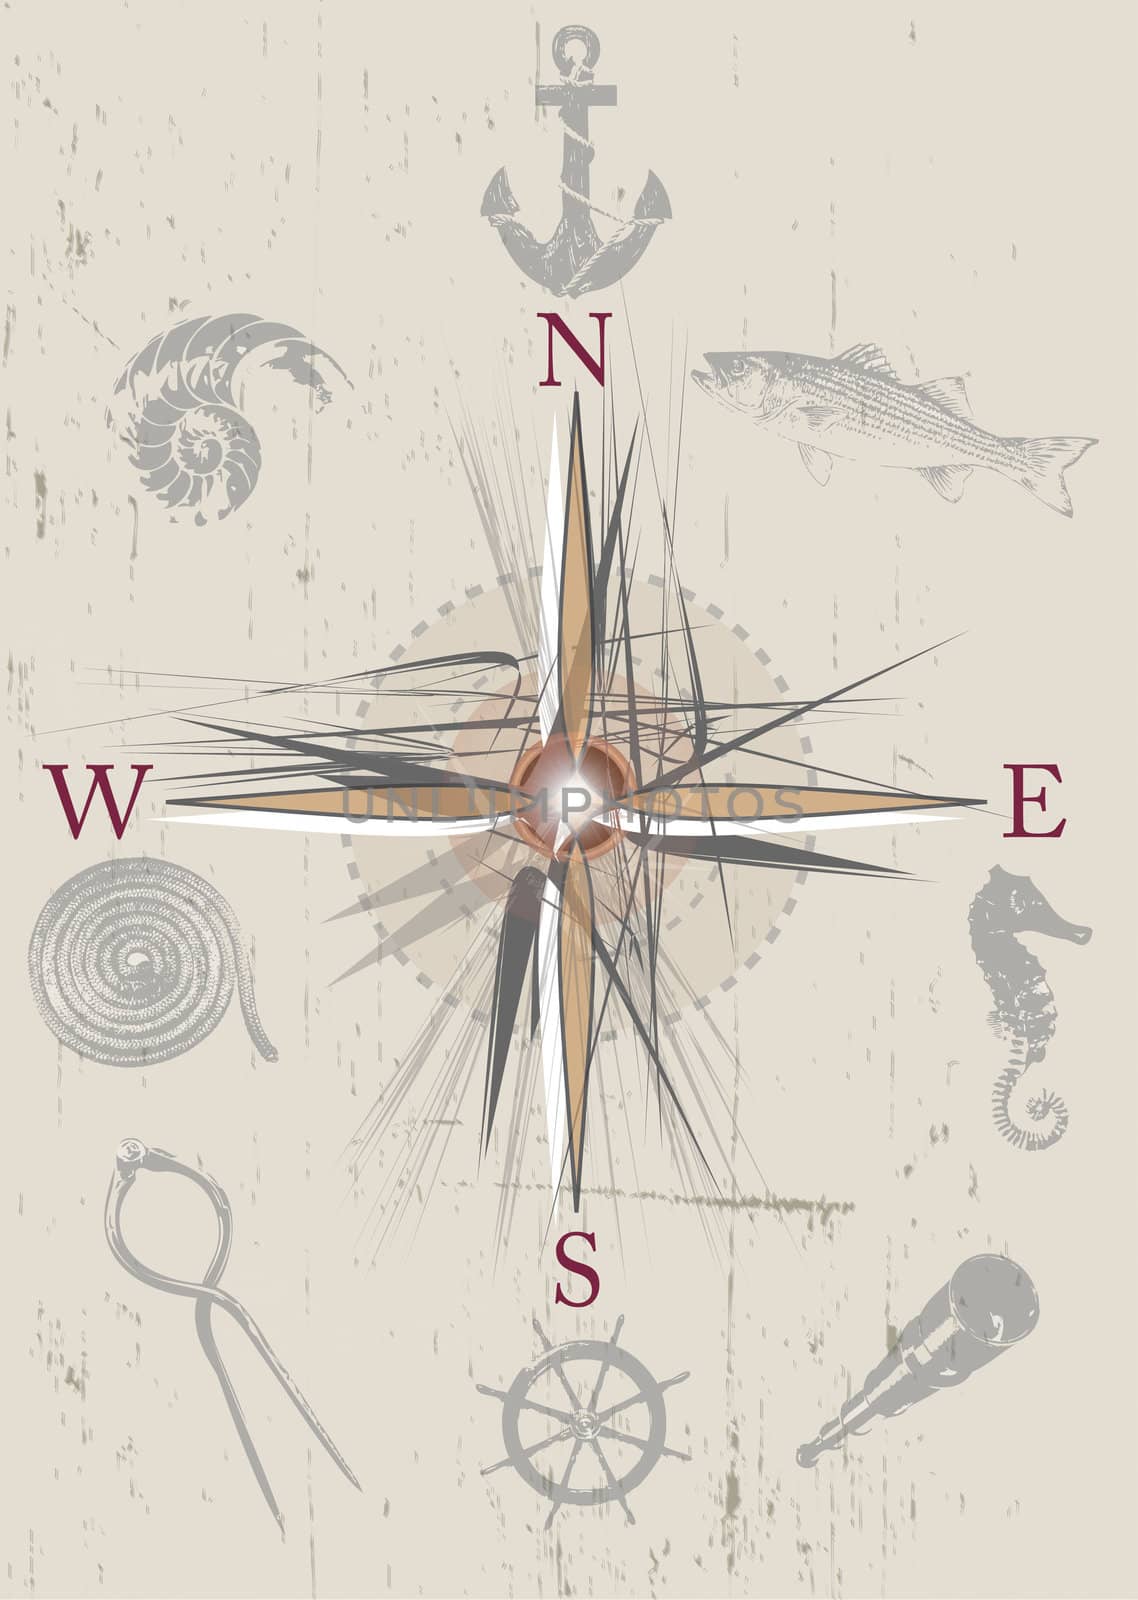 An illustration of a nautical compass with old retro style inset illustrations with a nautical or sea theme. Set on a grunge style background on a portrait format.